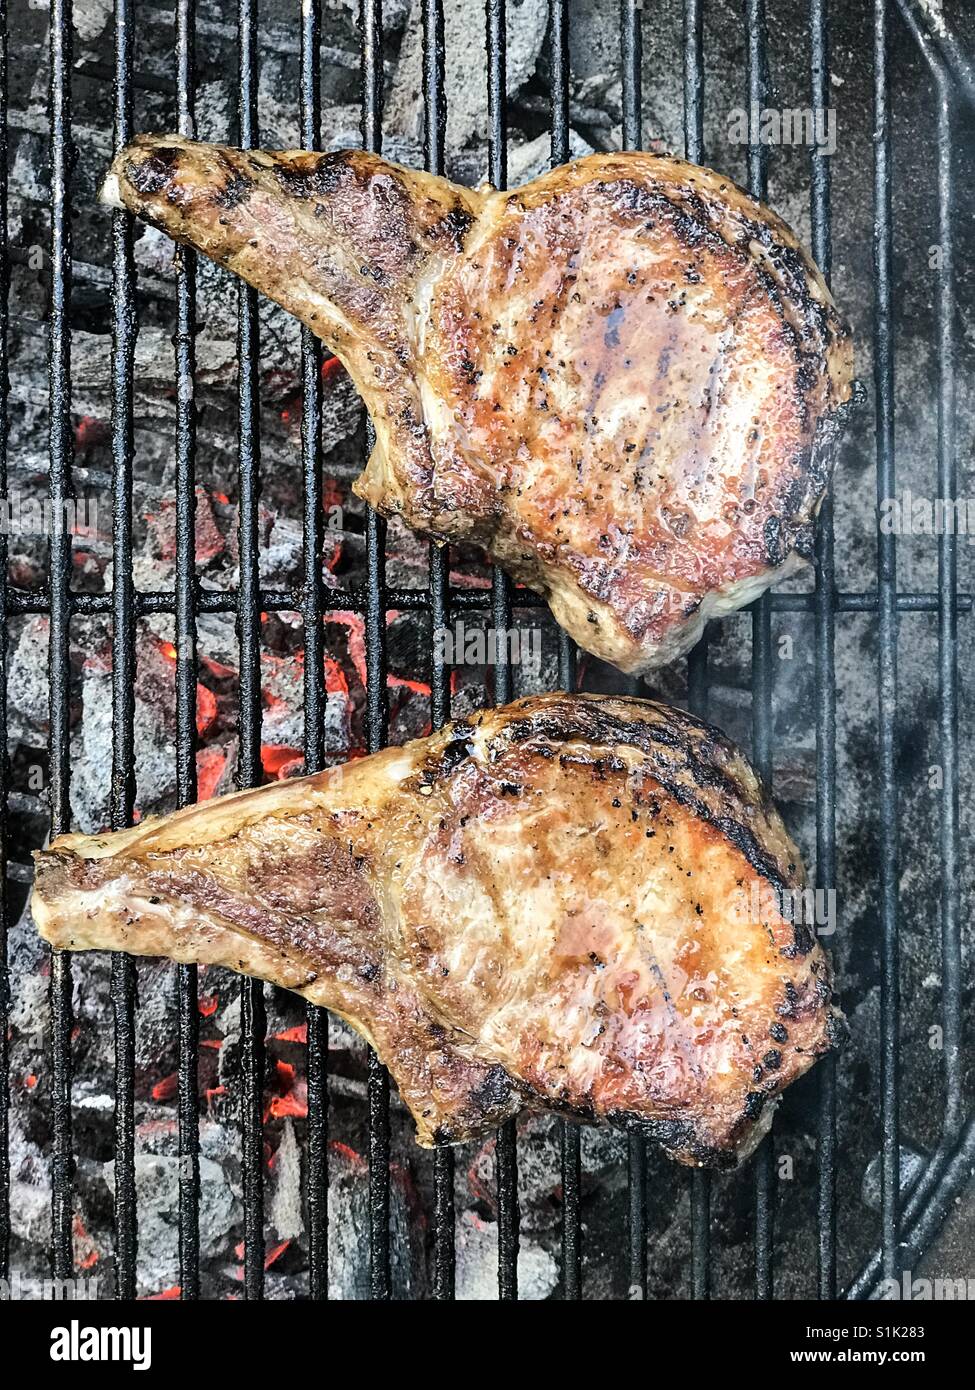 Two pork chops grilling on a charcoal barbecue. Stock Photo